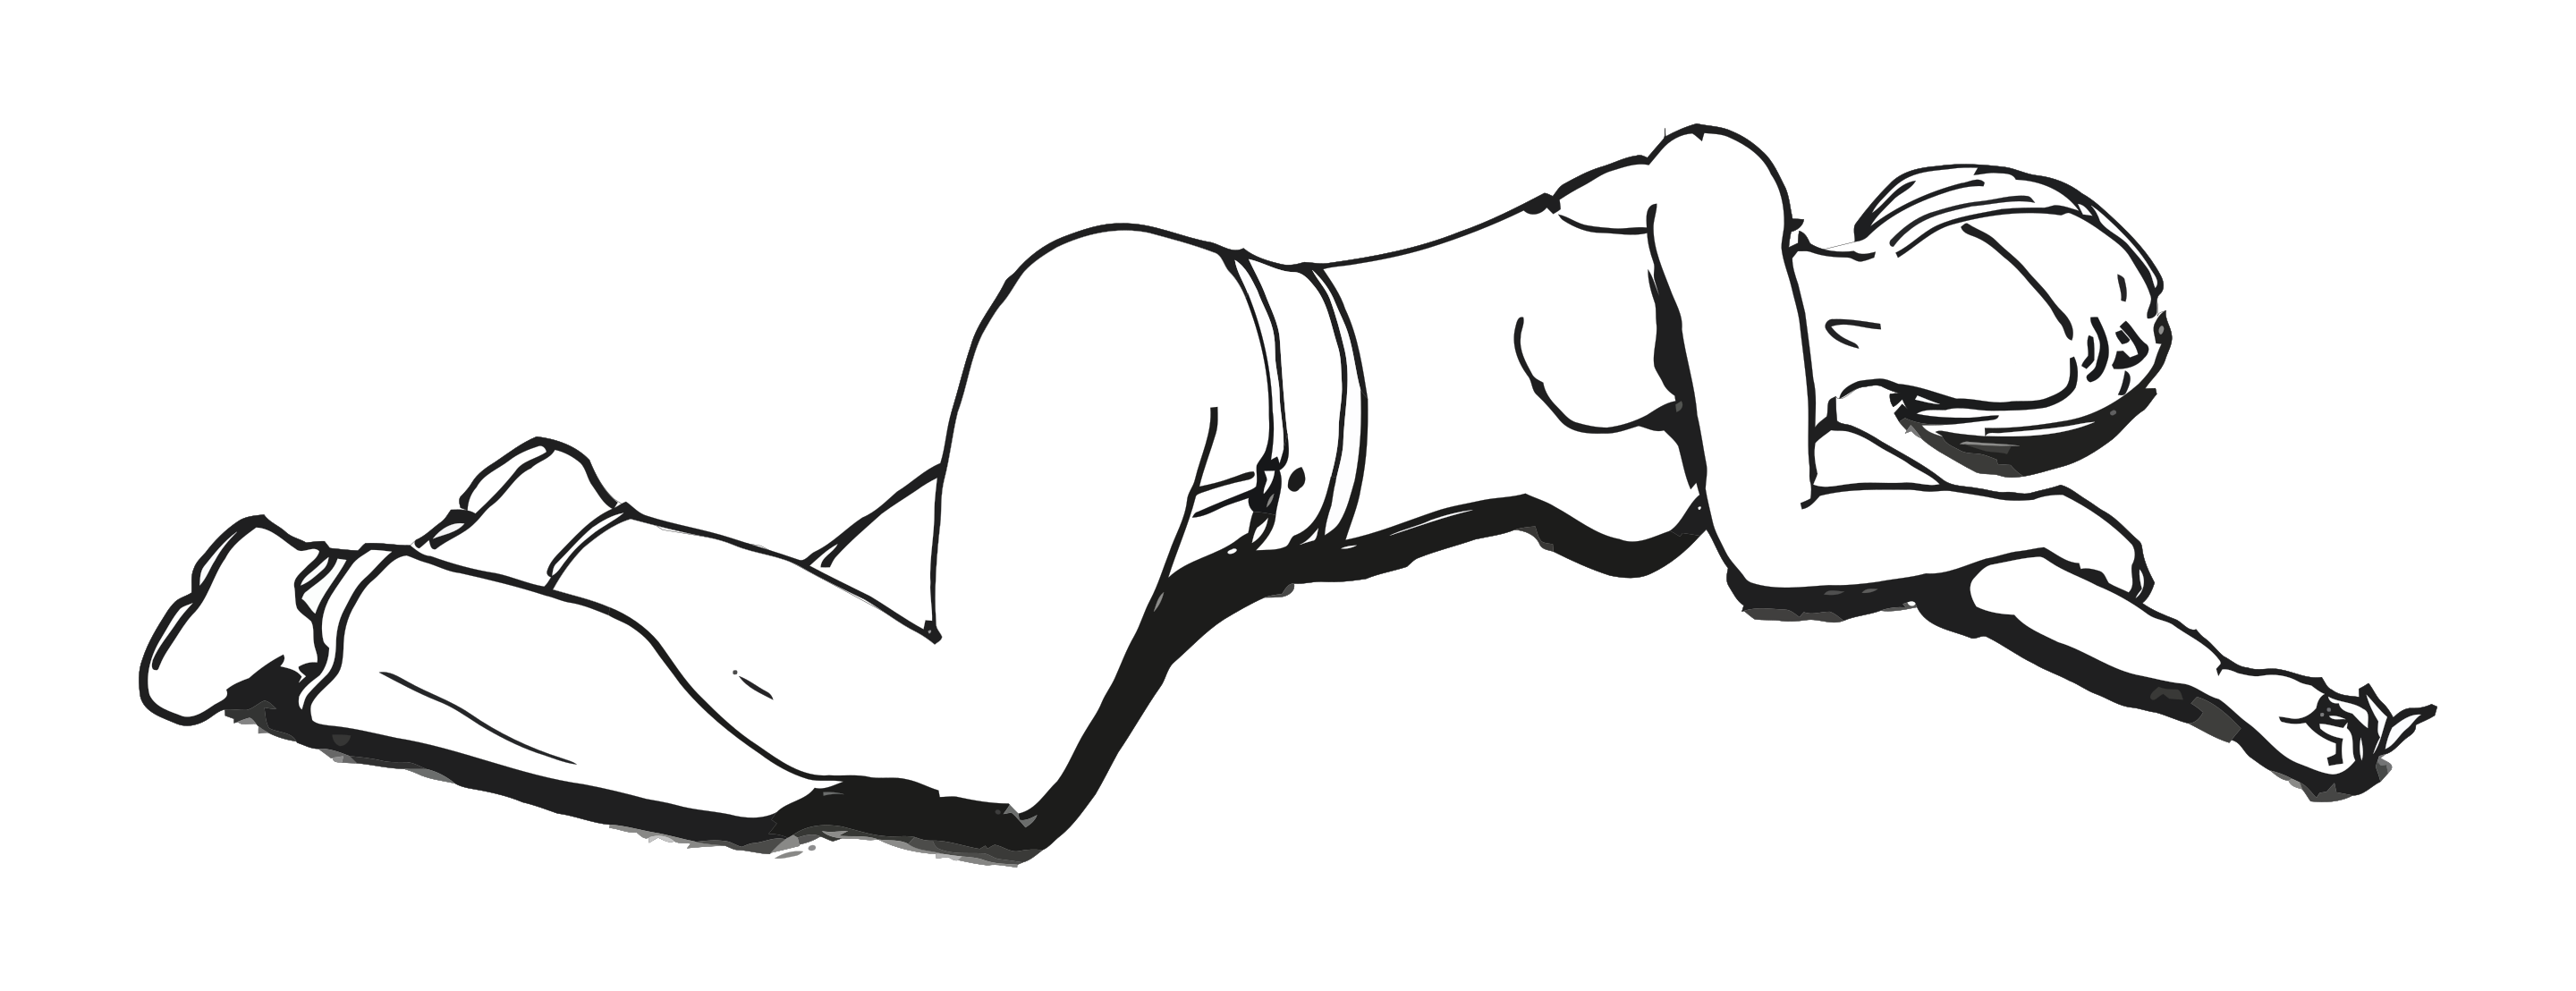 2880px-Recovery_position.svg.png